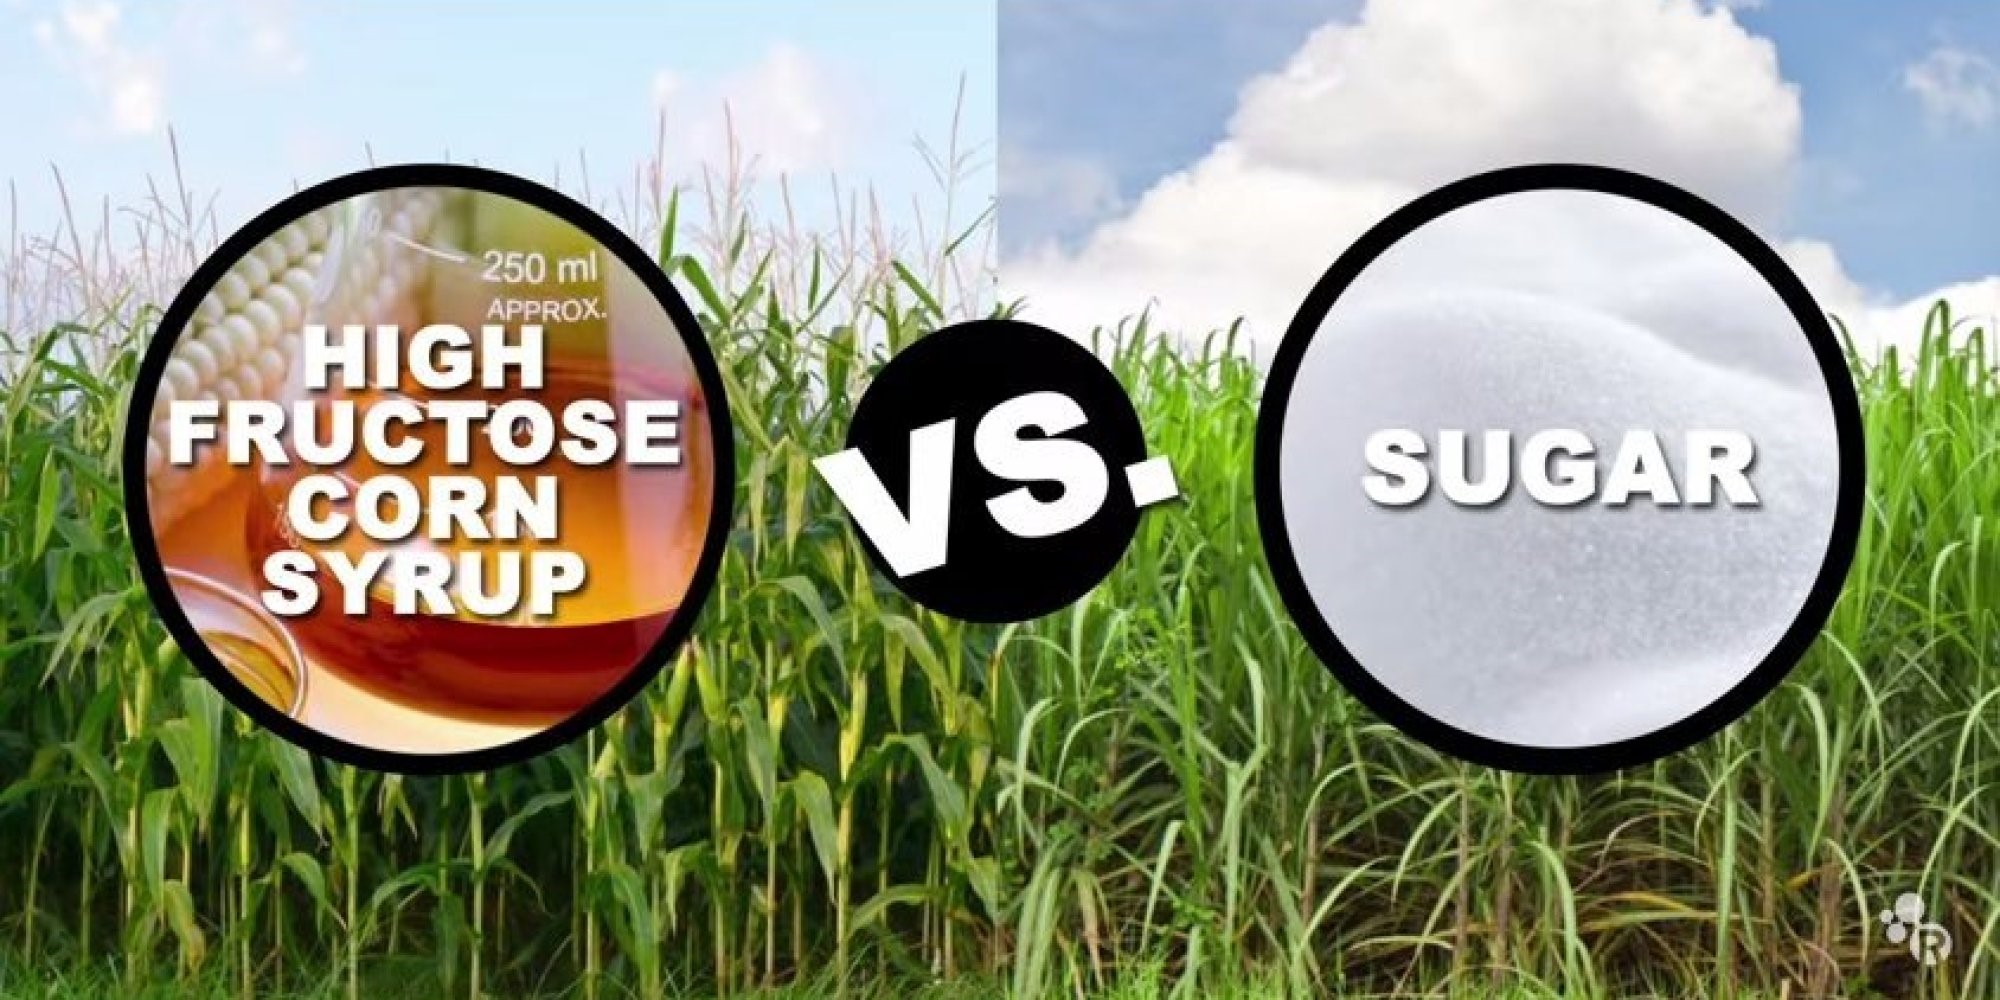 High Fructose Corn Syrup versus Sugar. Is one better or worse than the other? Here at Tognazzini, we’re going to discuss the pros and cons of both as it relates to the food service industry.